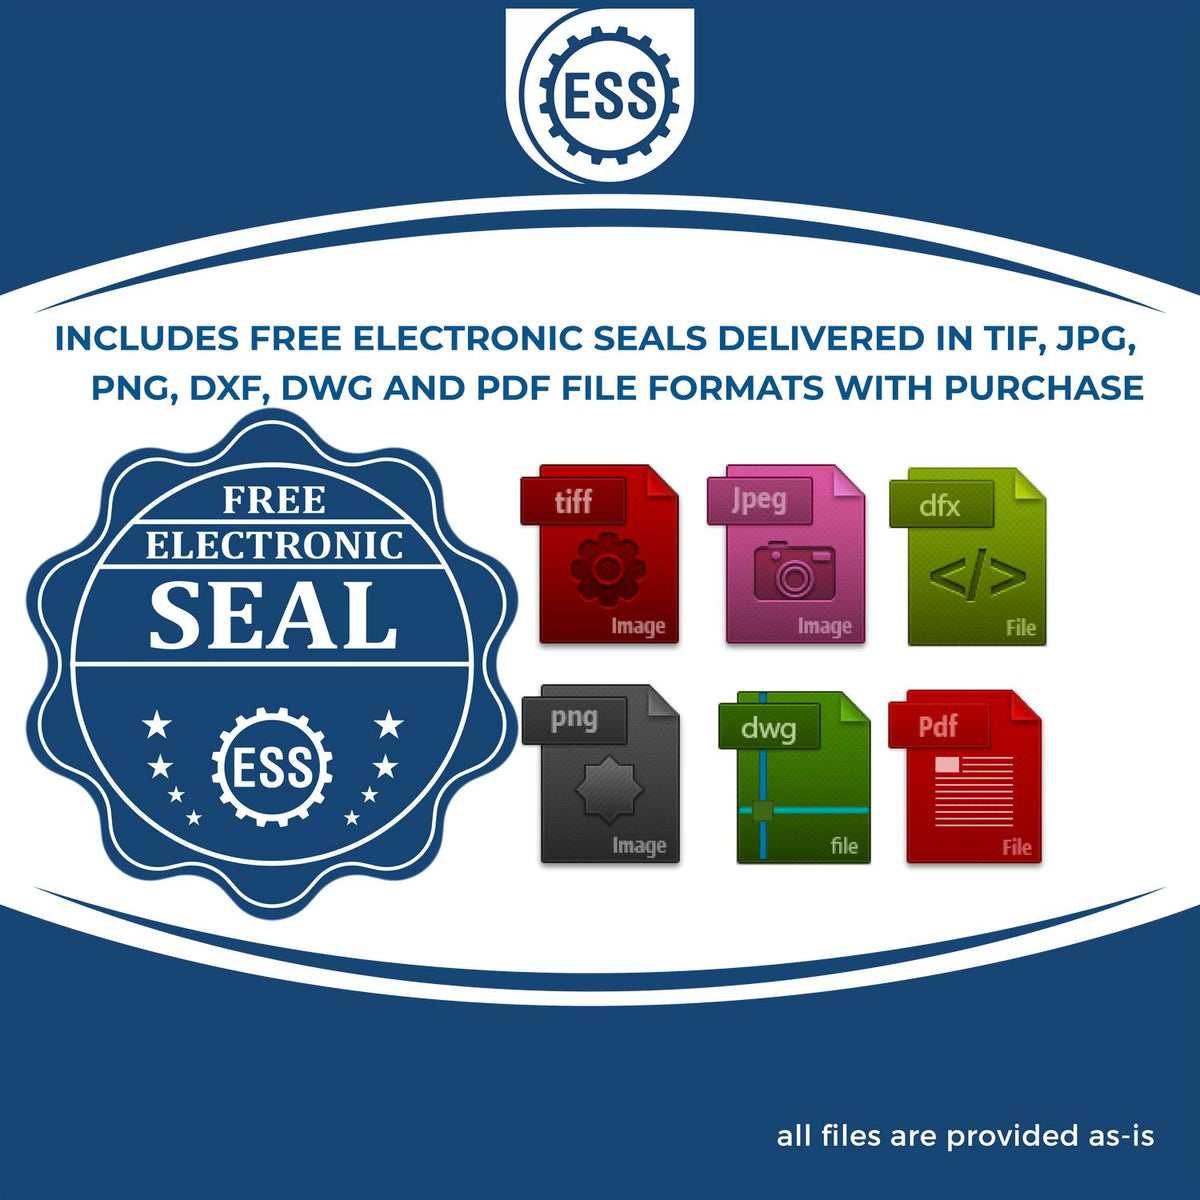 An infographic for the free electronic seal for the Wooden Handle Washington Rectangular Notary Public Stamp illustrating the different file type icons such as DXF, DWG, TIF, JPG and PNG.